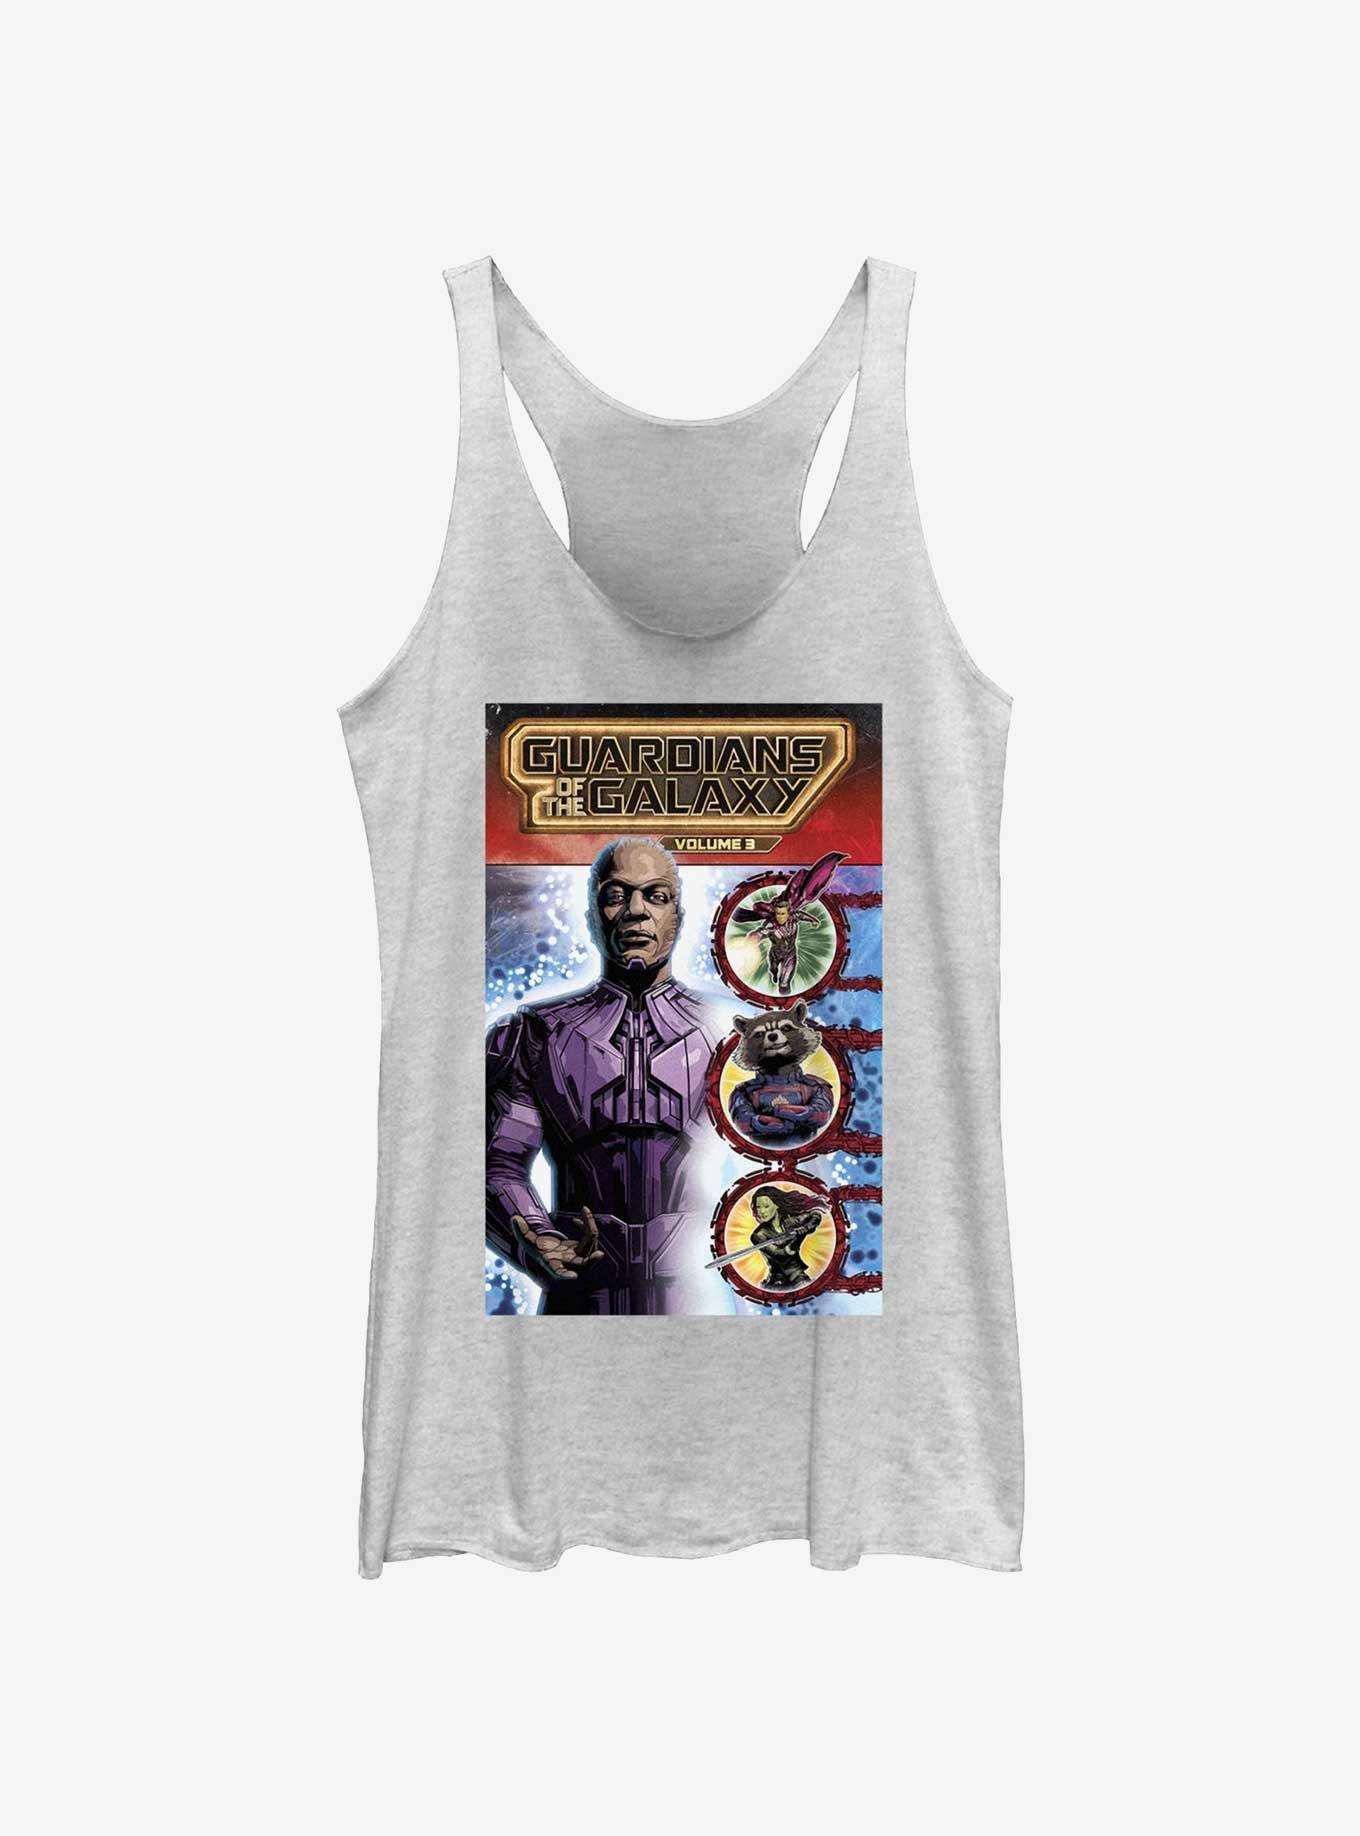 Marvel Guardians of the Galaxy Vol. 3 High Evolutionary Comic Poster Girls Tank